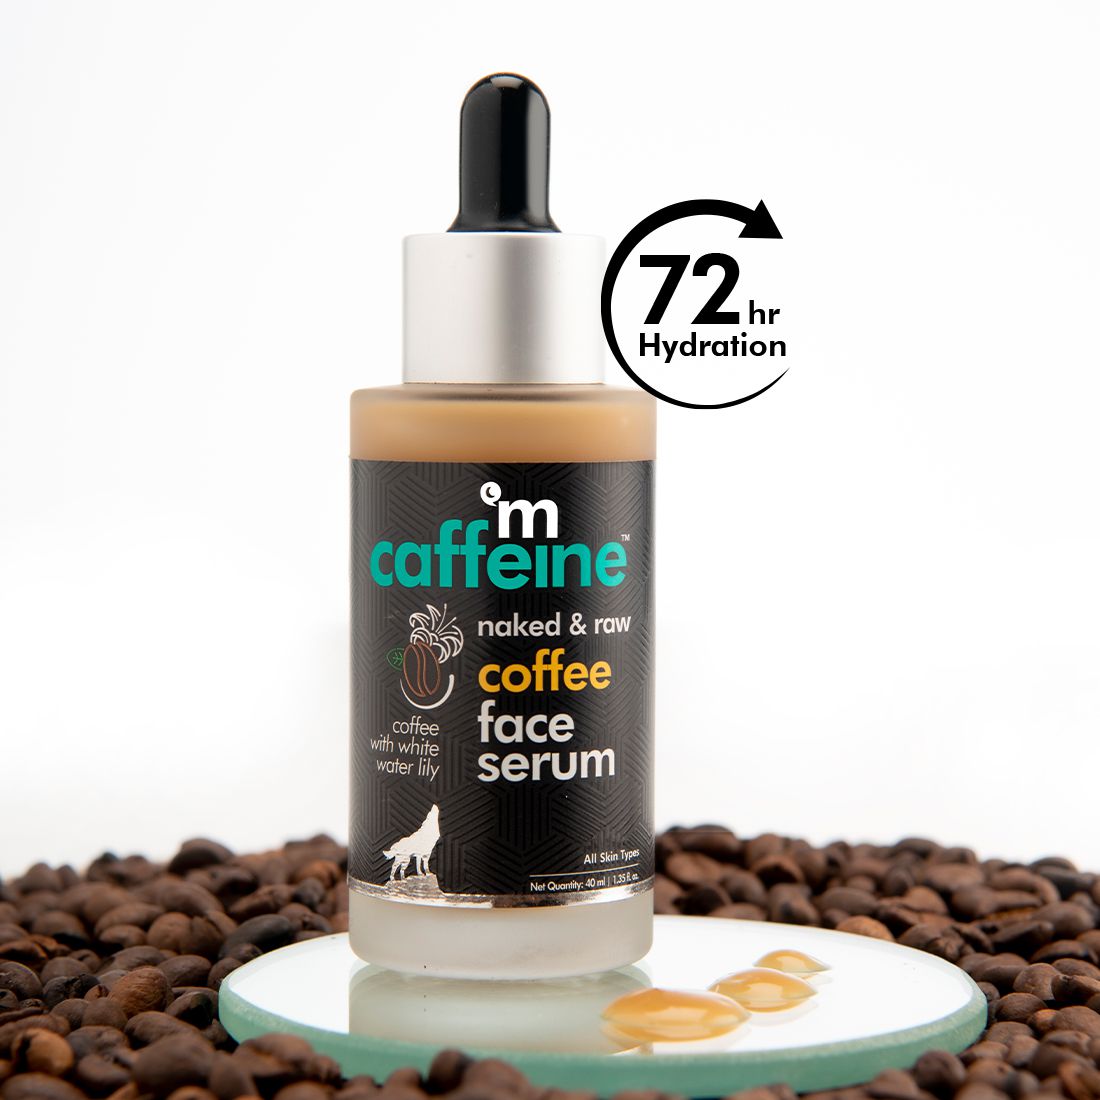     			mCaffeine Coffee Hydrating Face Serum For Glowing Skin with Vitamin E for Sun Damage Protection(40ml)